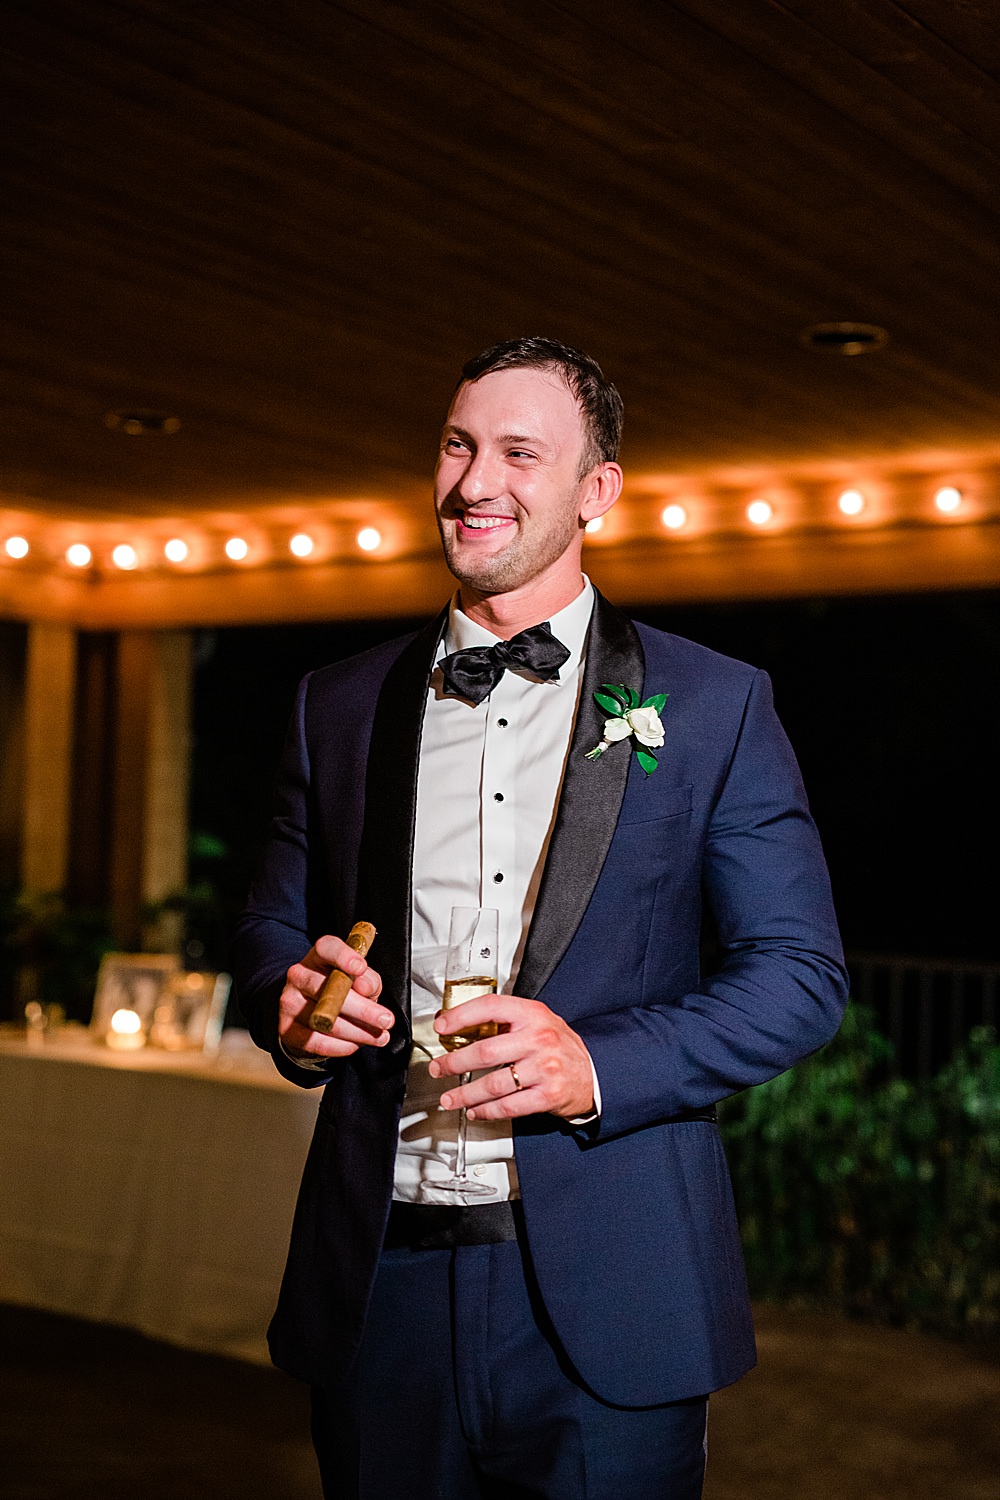 Portrait of a groom holding a glass of champagne and cigar